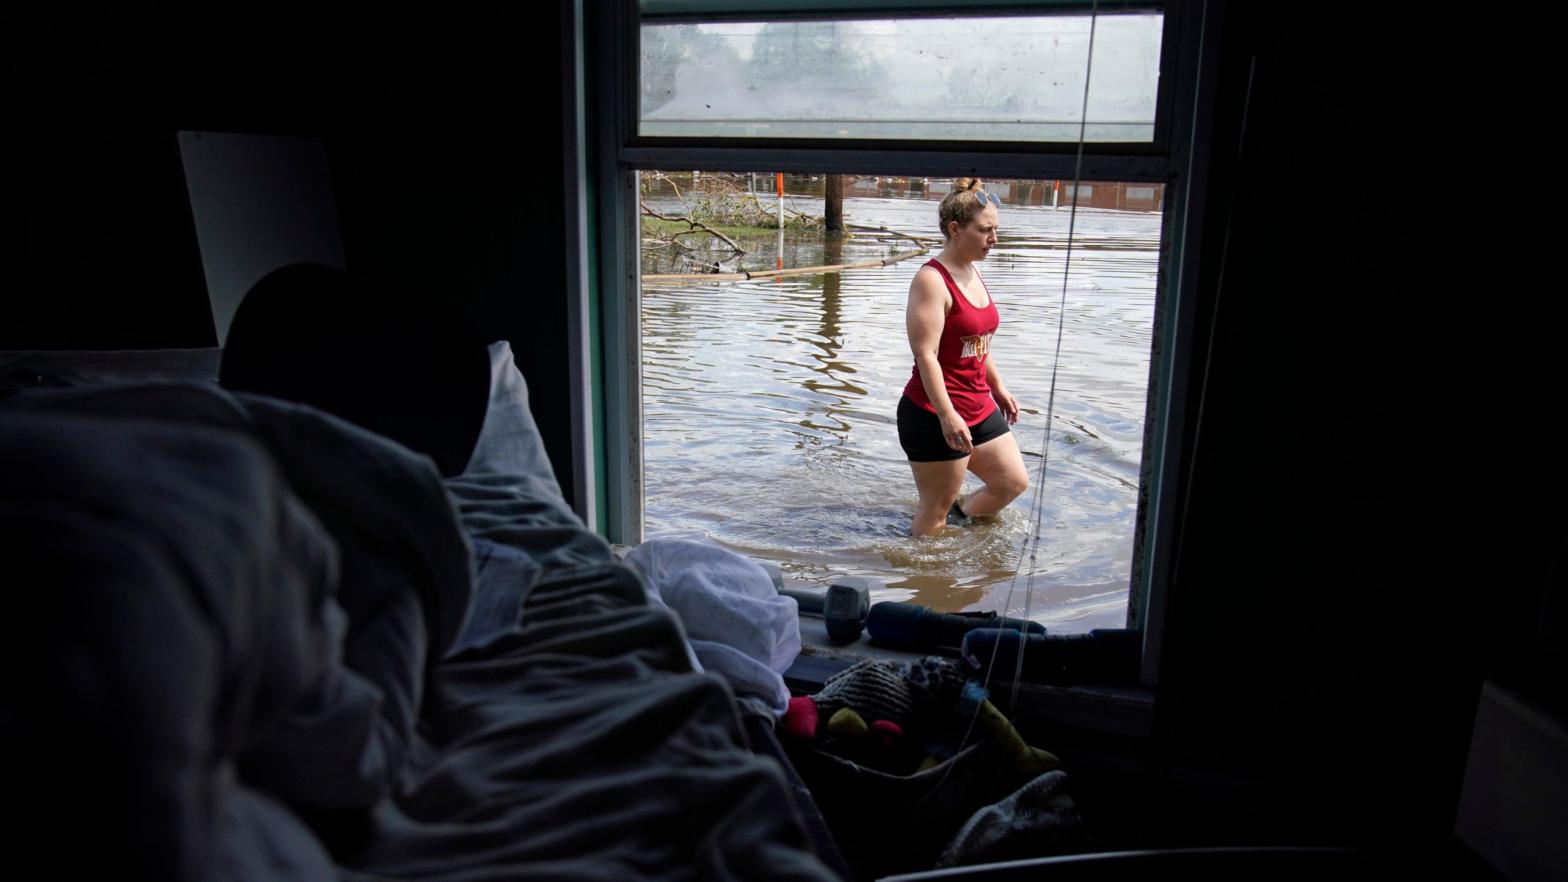 Emily Francois walks through floodwaters beside her flood damaged home in the aftermath of Hurricane Ida, Wednesday, Sept. 1, 2021, in Jean Lafitte, Louisiana. (Photo: John Locher, AP)